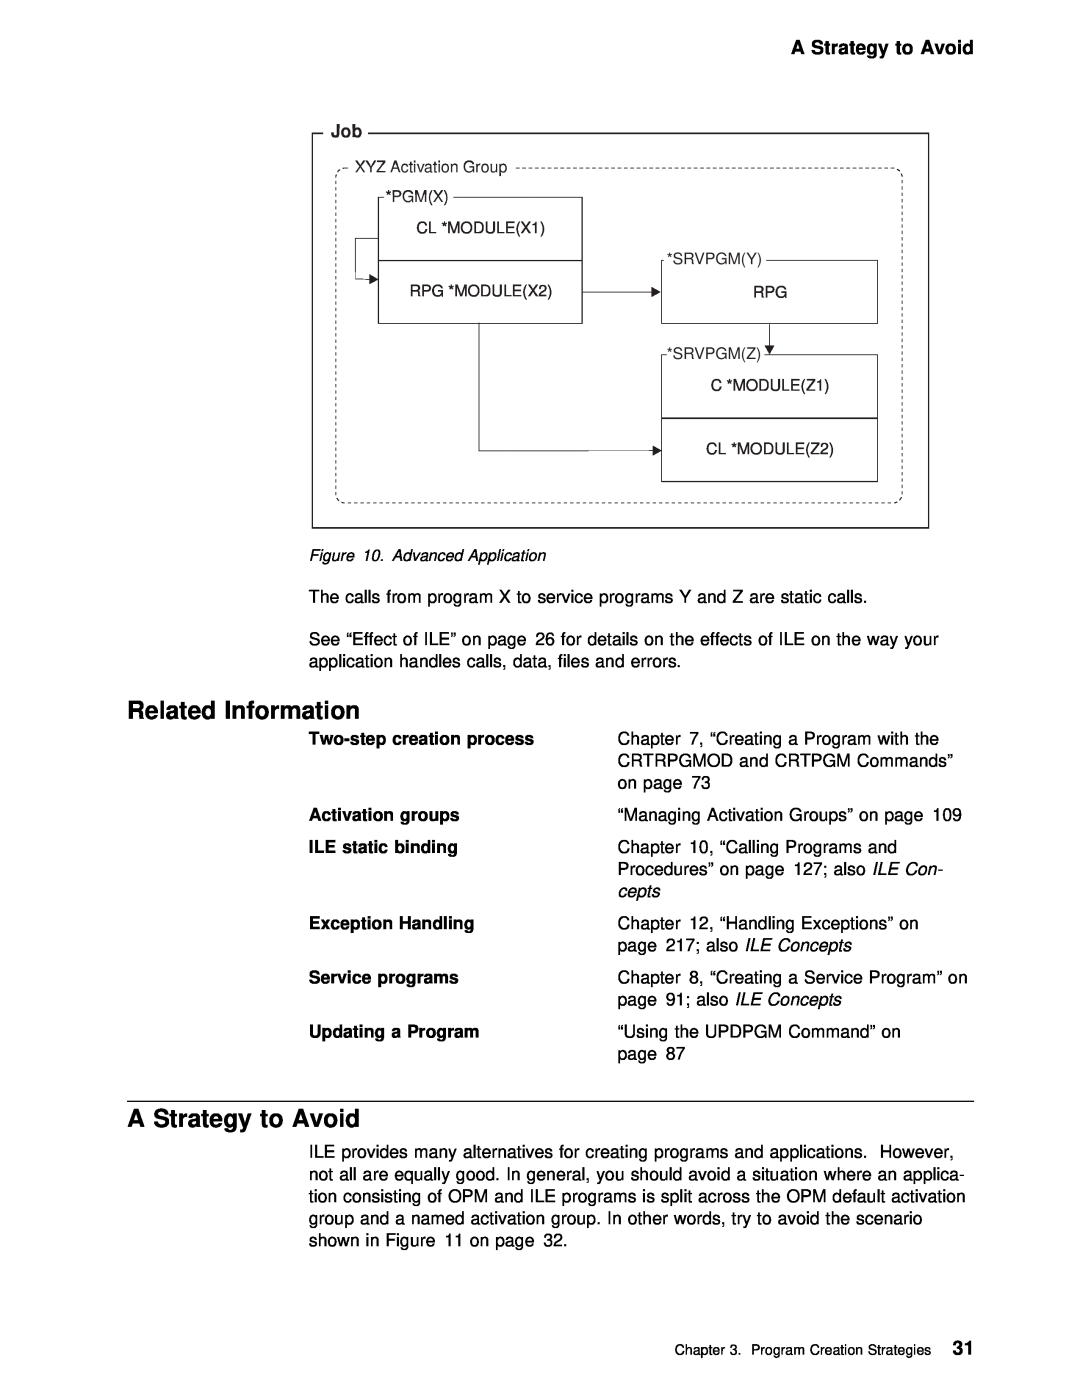 IBM AS/400 manual A Strategy to Avoid, Related Information, Service 